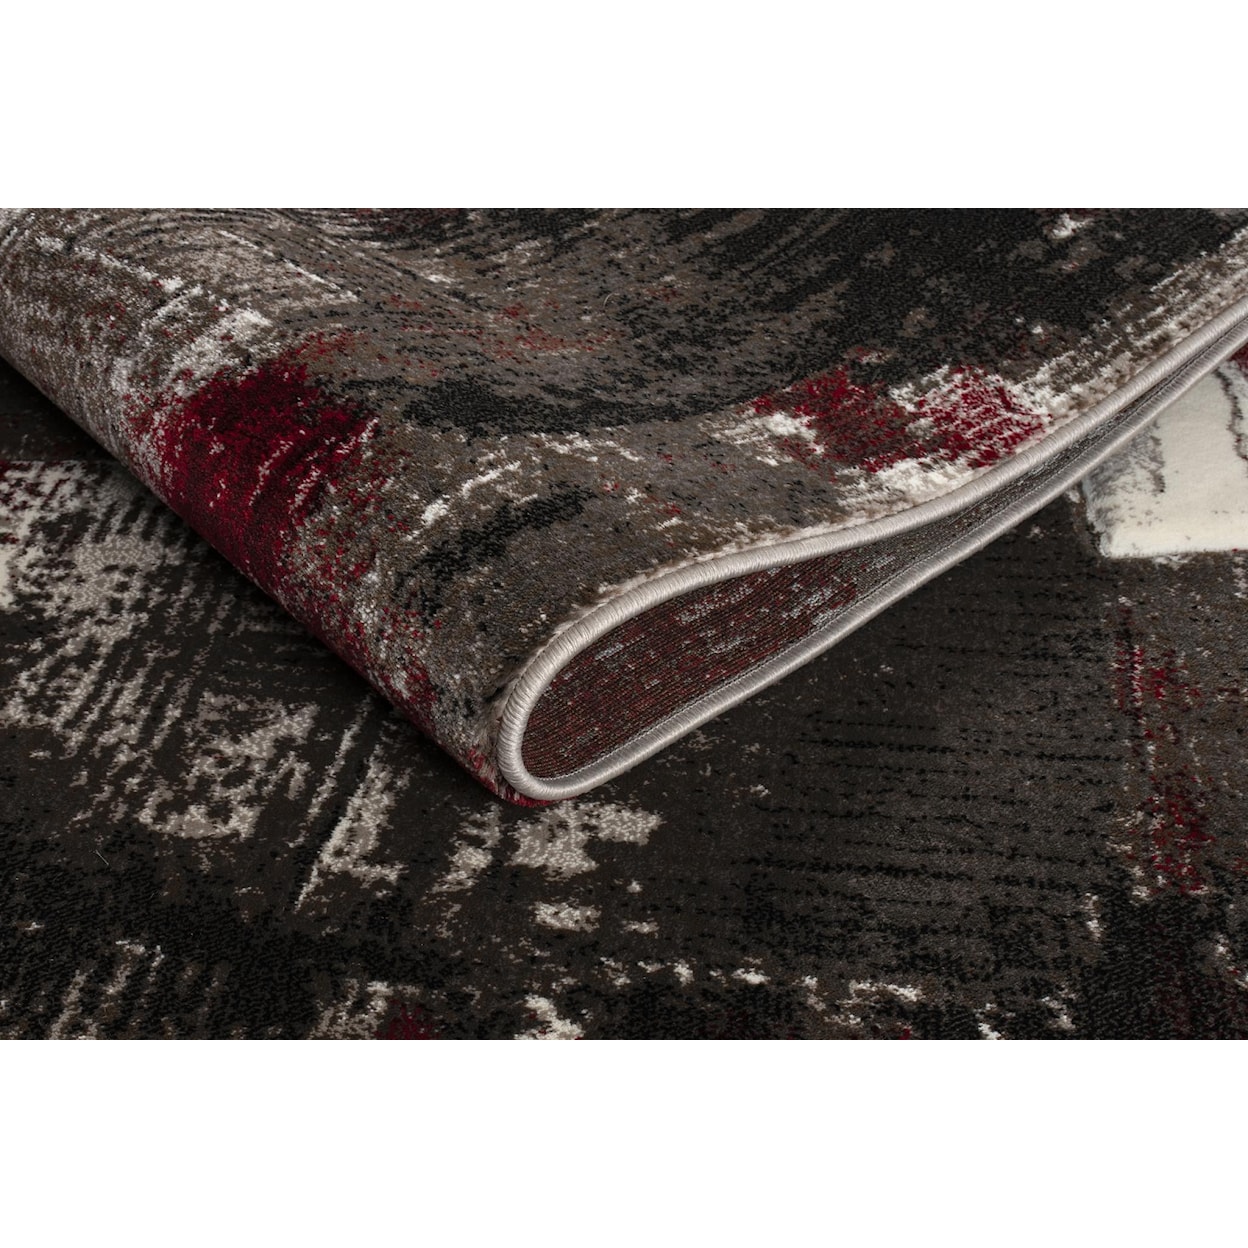 MDA Rugs Rhodes Collection RHODES 8X11 RED/BROWN AREA RUG |